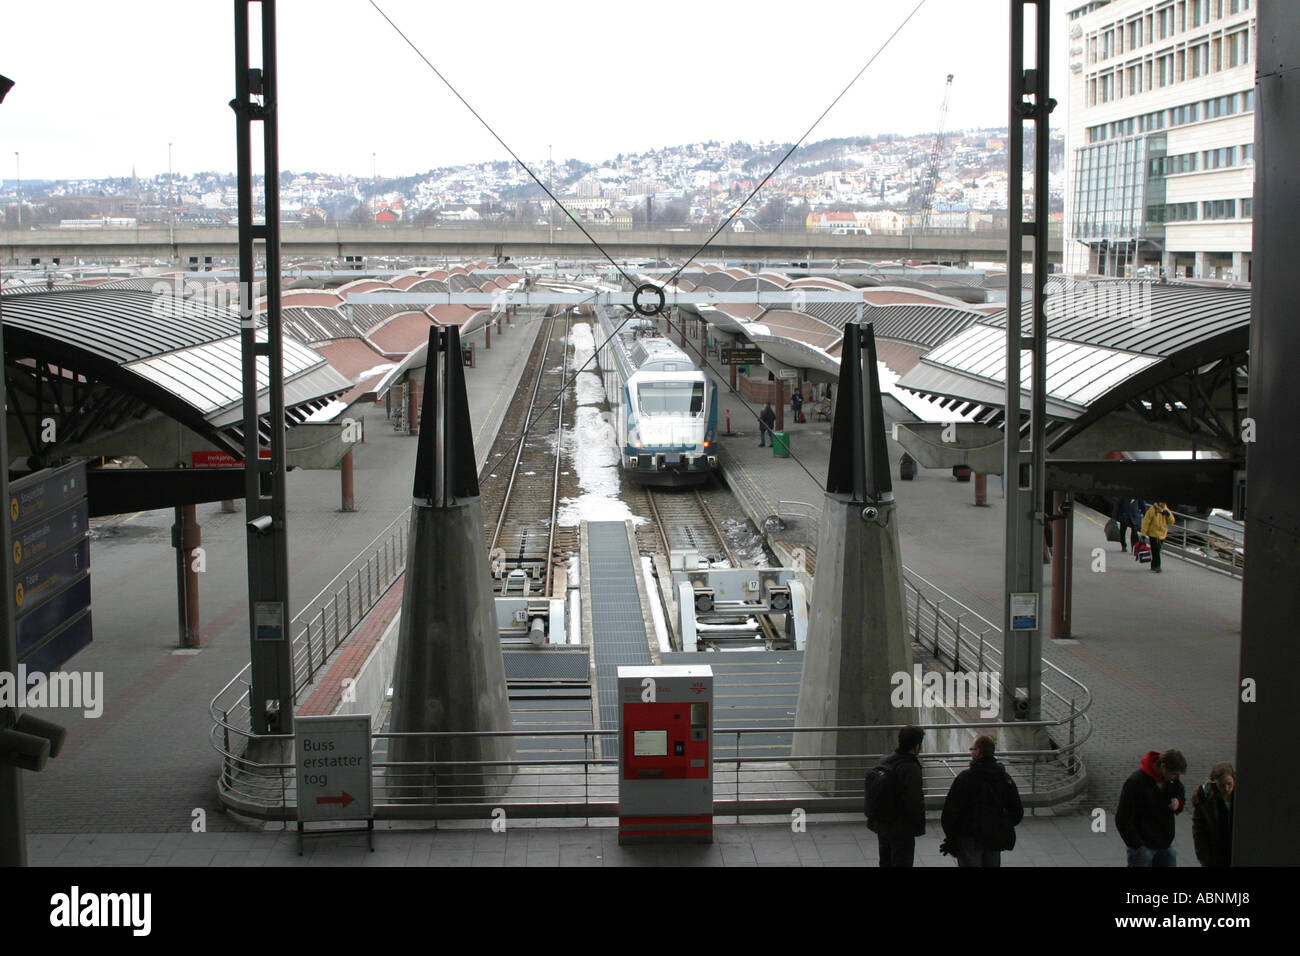 The train station in Oslo Norway. Stock Photo